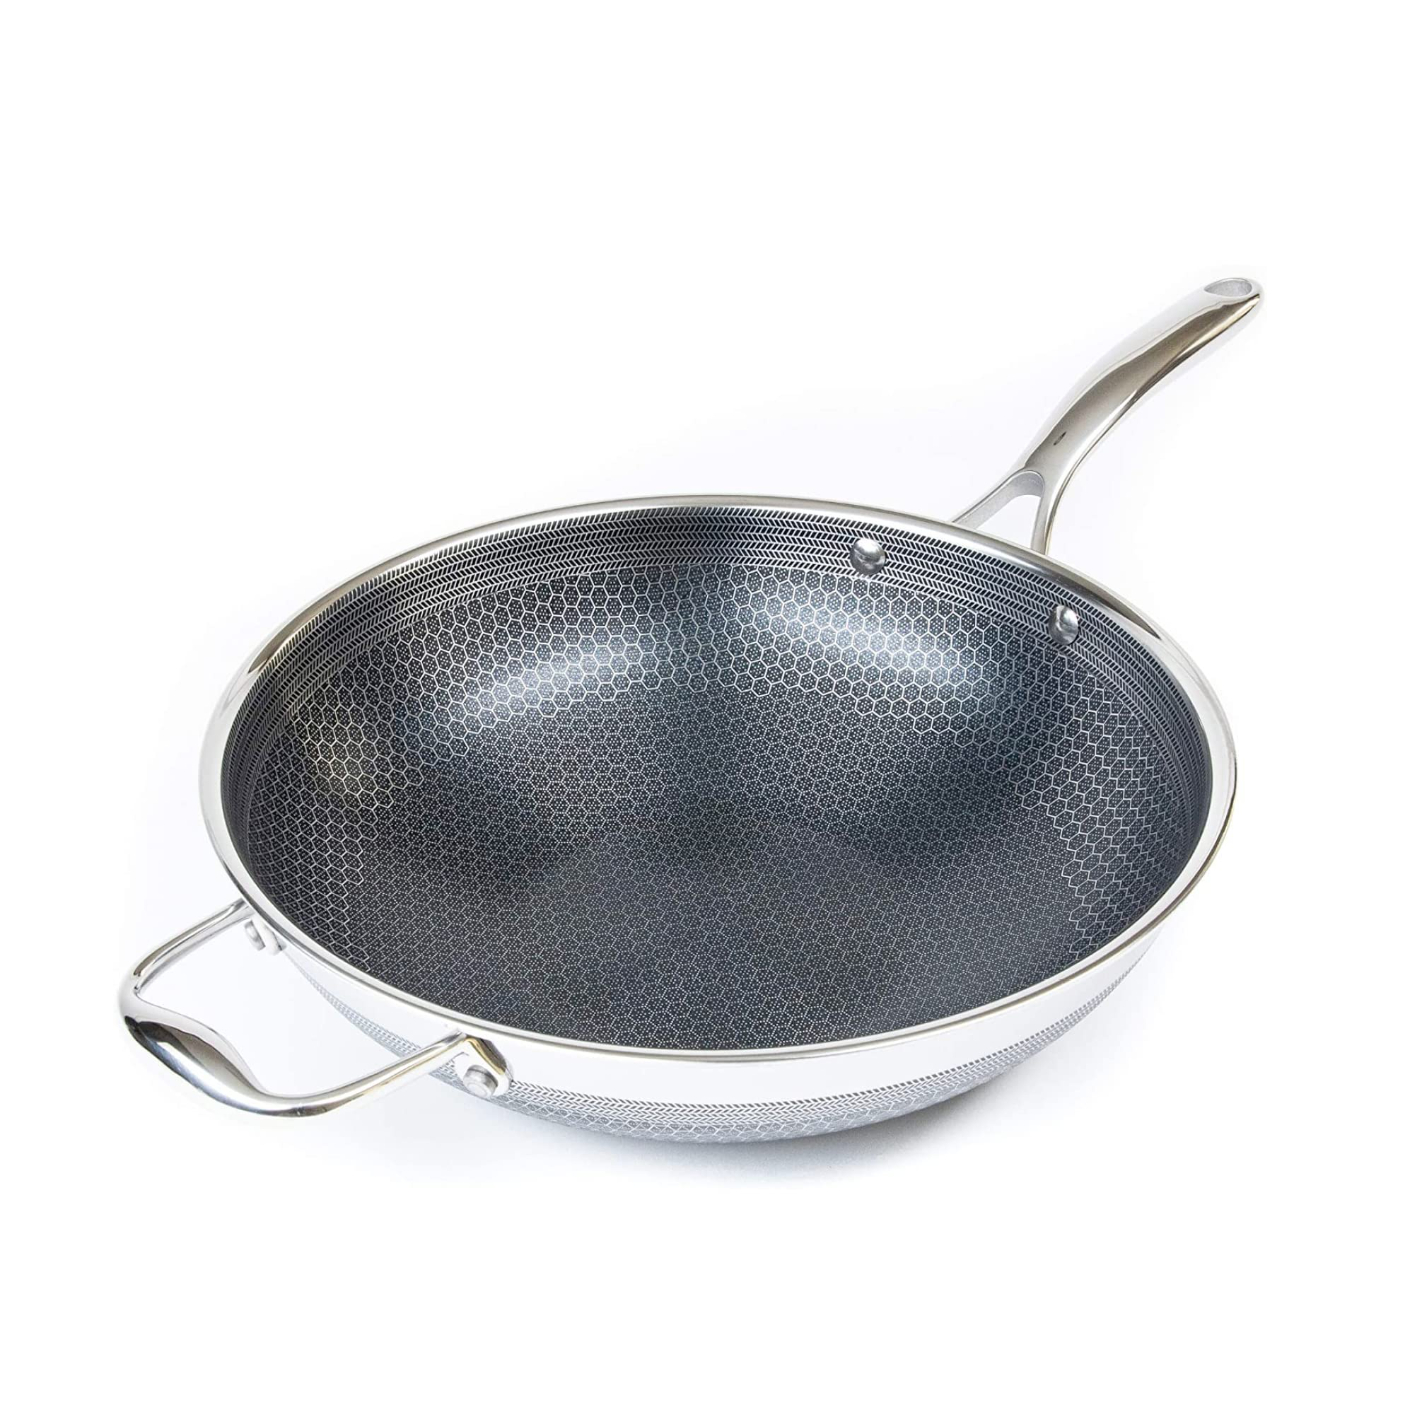 Hybrid Stainless Steel Wok Pan with Stay-Cool Handle - PFOA Free, Dishwasher and Oven Safe, Non Stick, Works with Induction, Ceramic, Electric, and Gas Cooktops